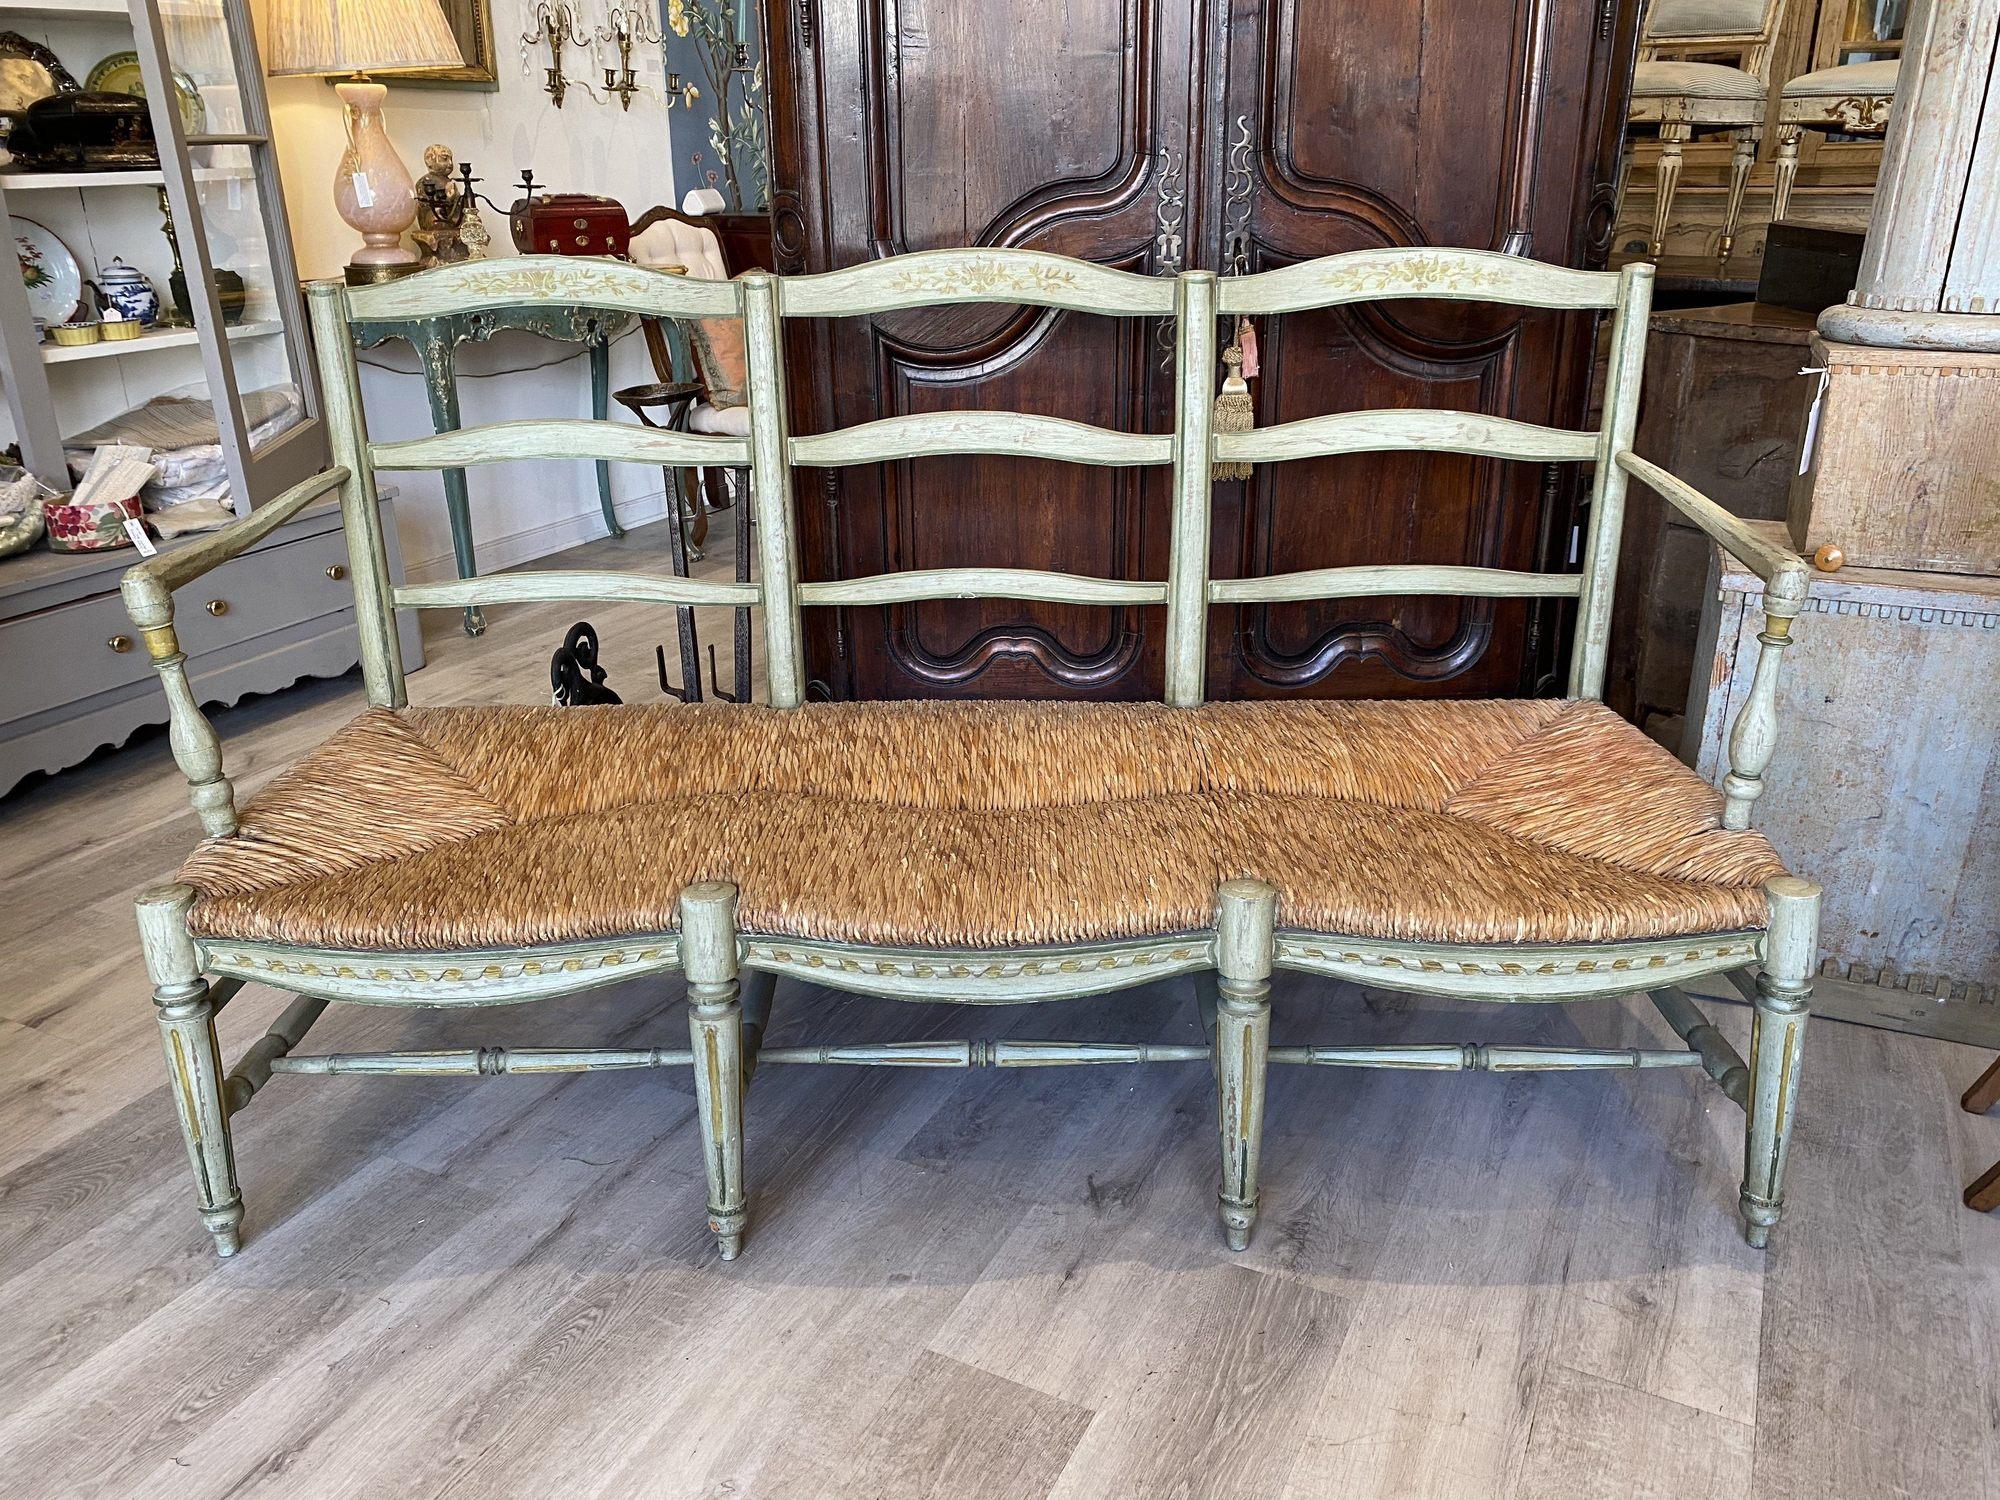 Beautiful French provincial rush seat settee bench with a matching pair of fauteuils (armchairs), pair of armchairs, beechwood, hand carved and painted, circa 1780.

The three-seat ladder back settee having green paint and painted floral design on